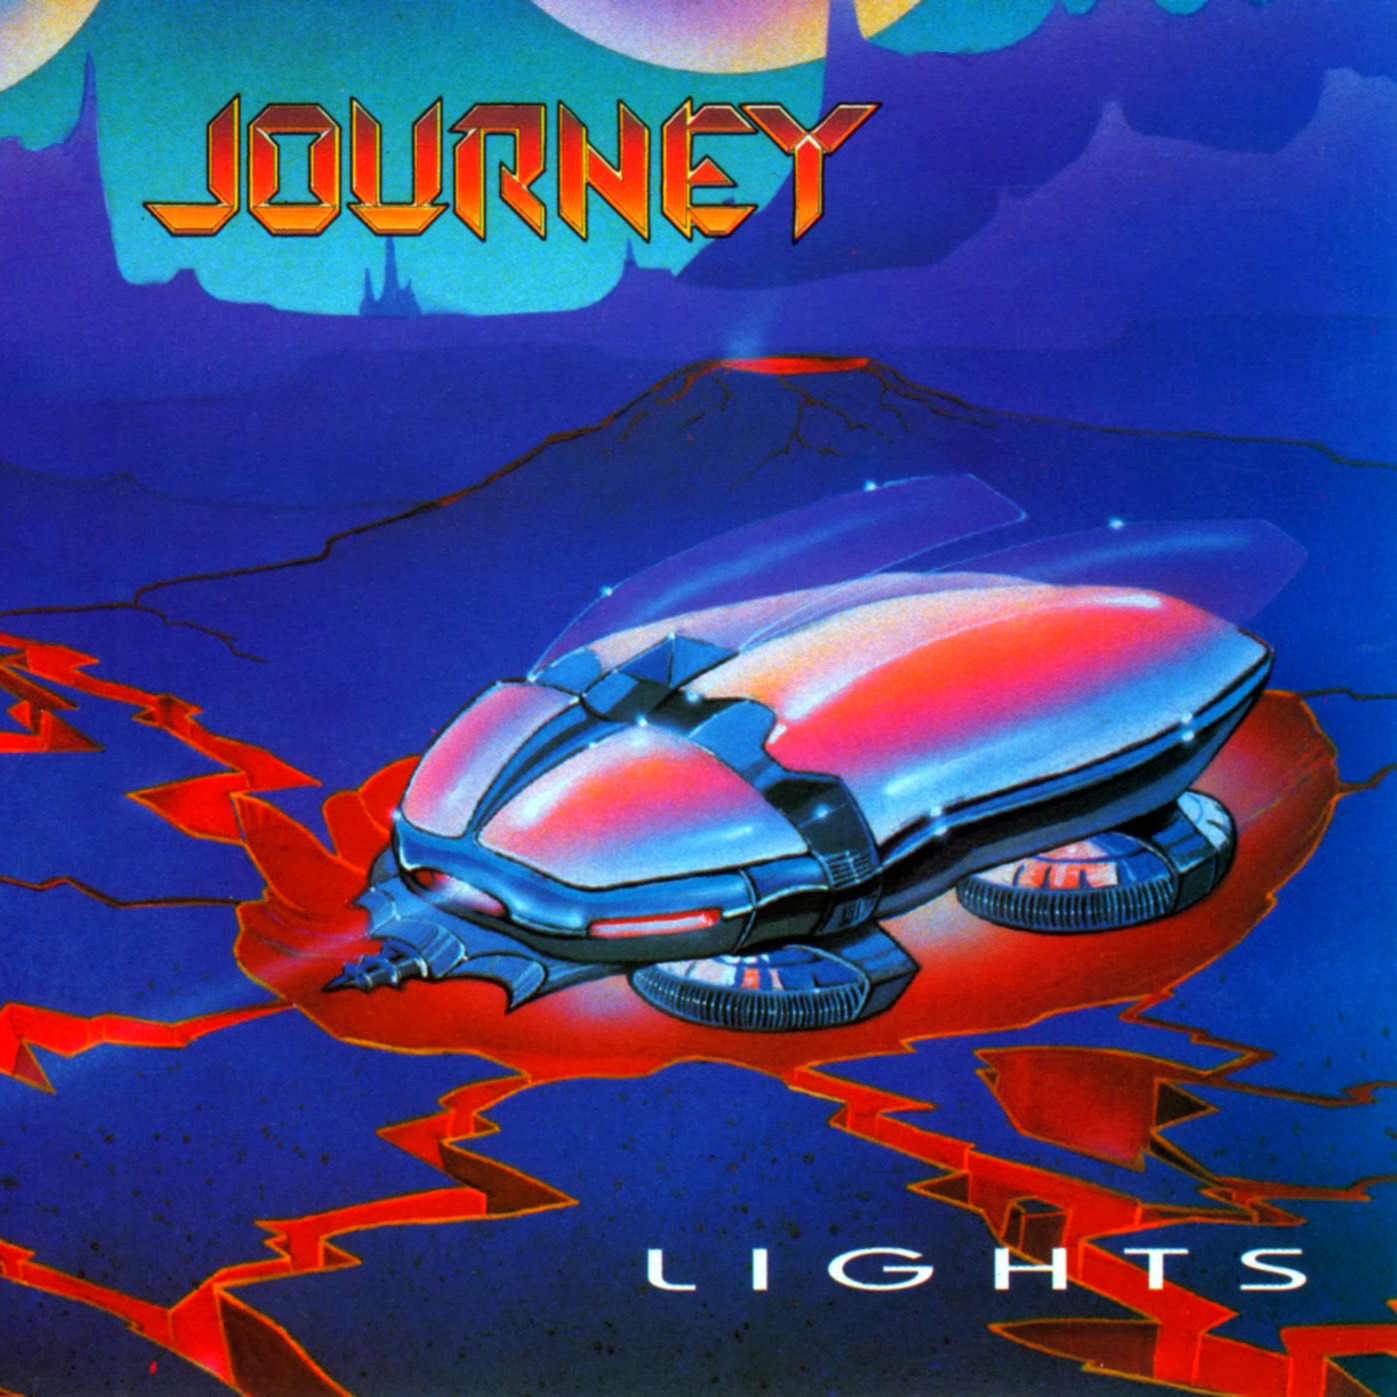 journey band when the lights go down in the city